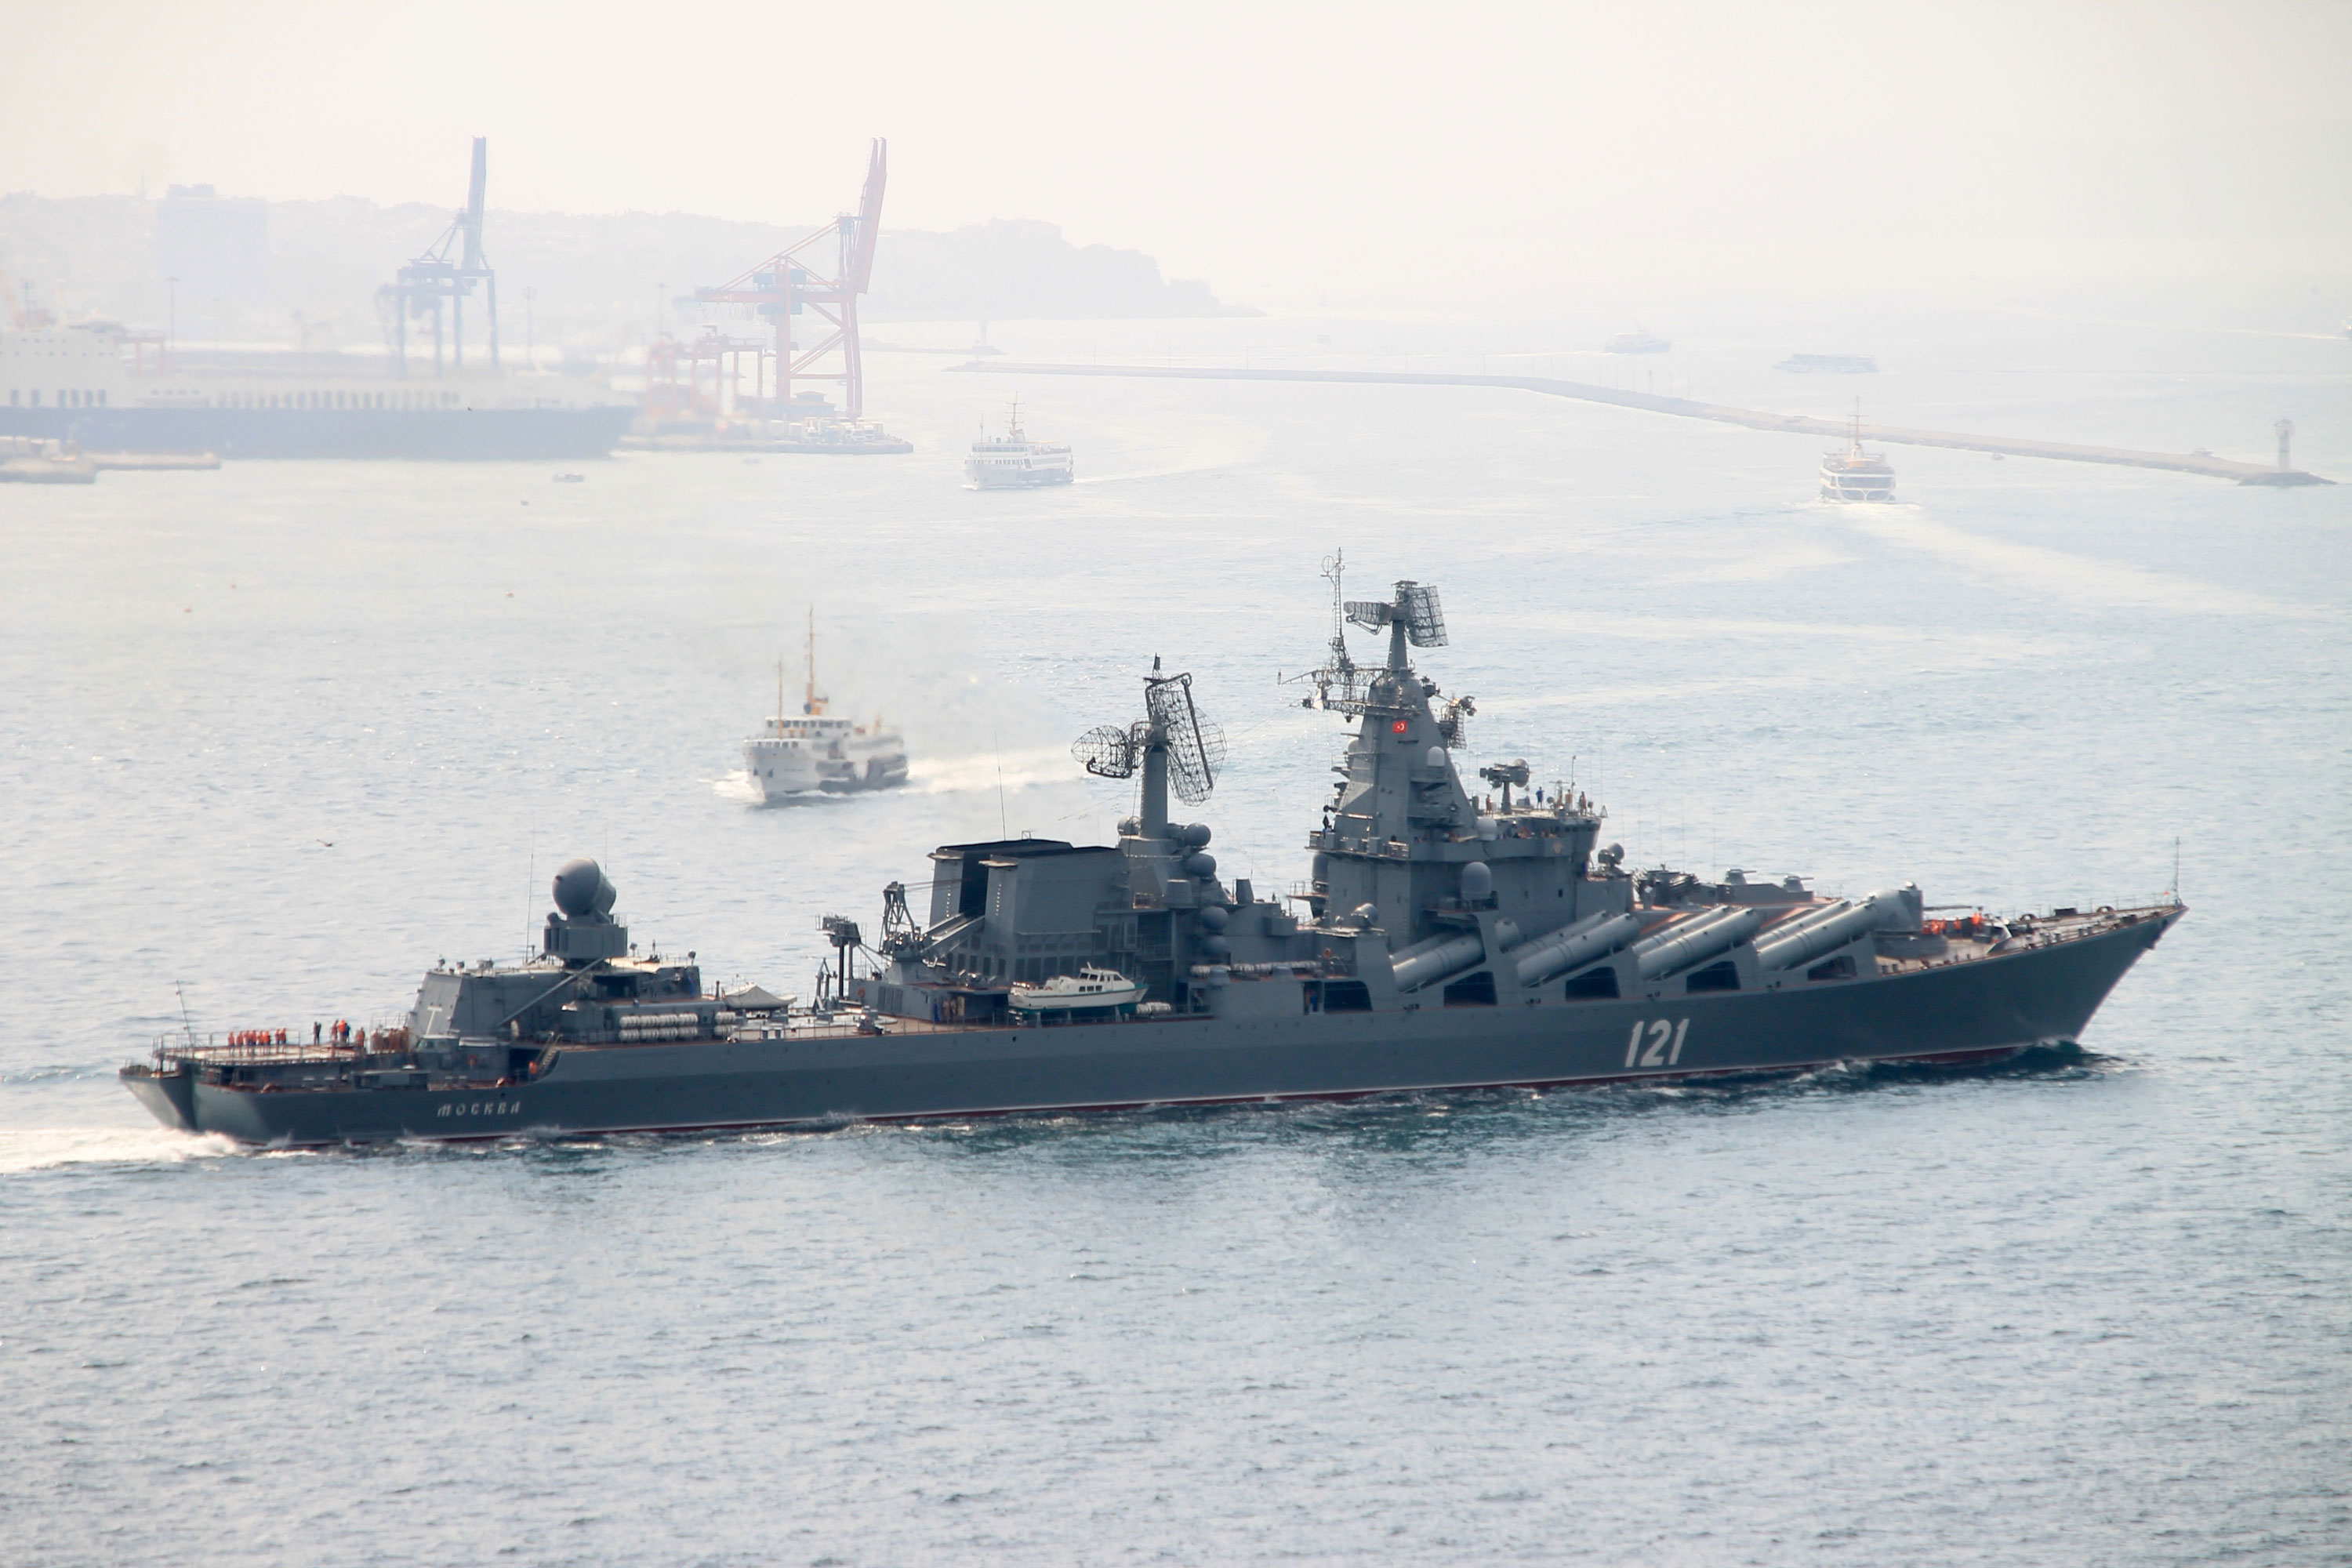 The Russian warship Moskva in Istanbul, Turkey, on September 7, 2014.